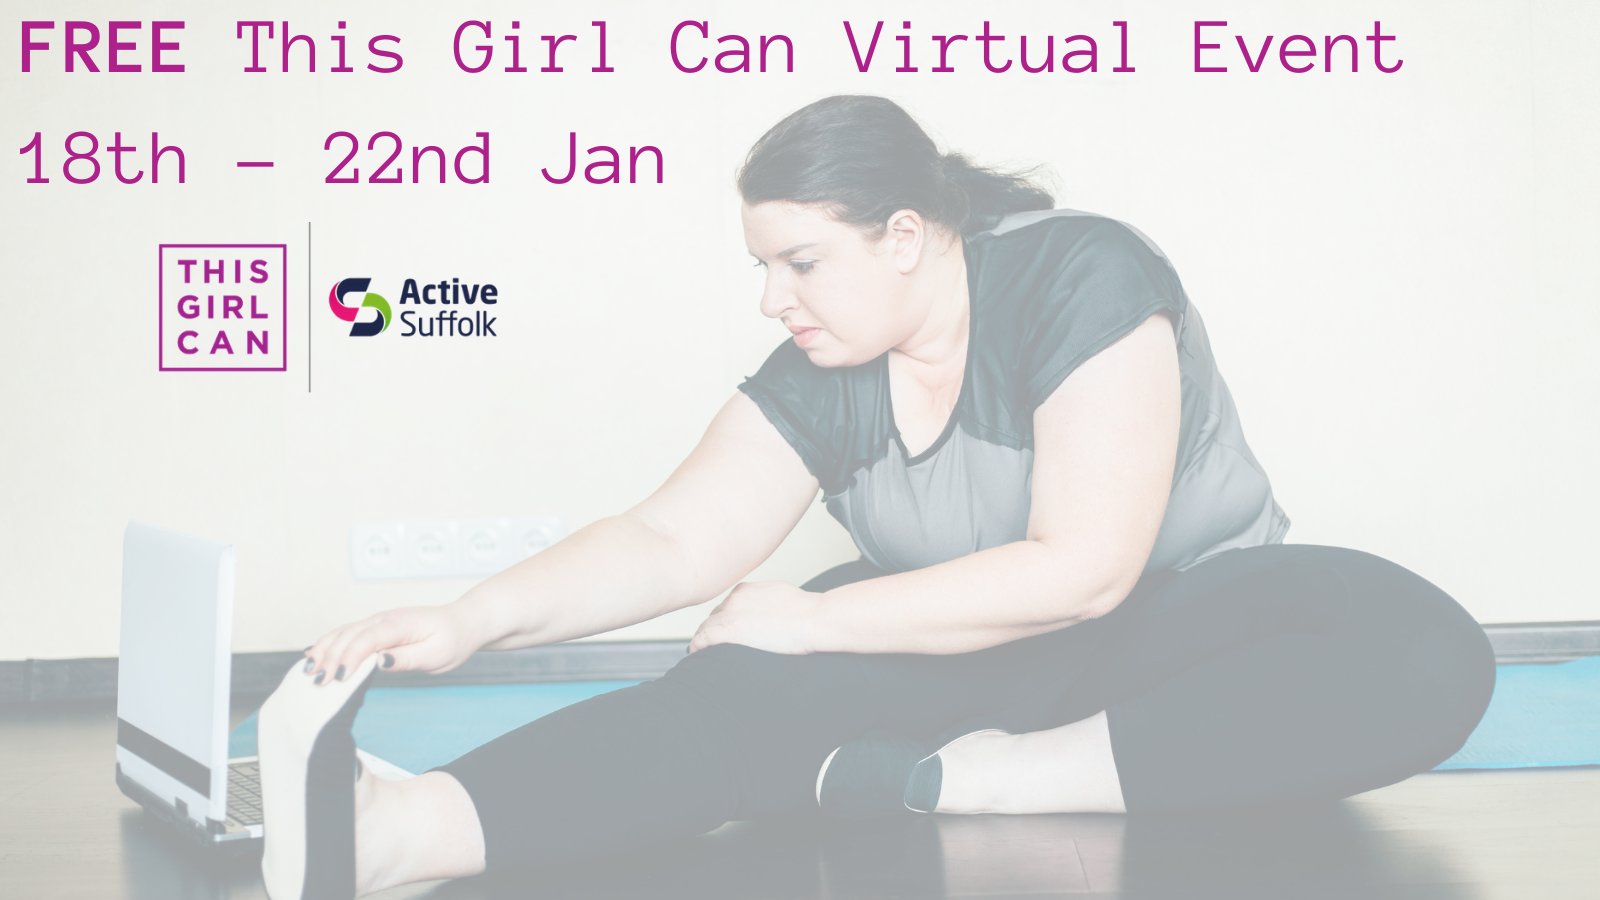 This Girl Can Virtual Event Week Promo